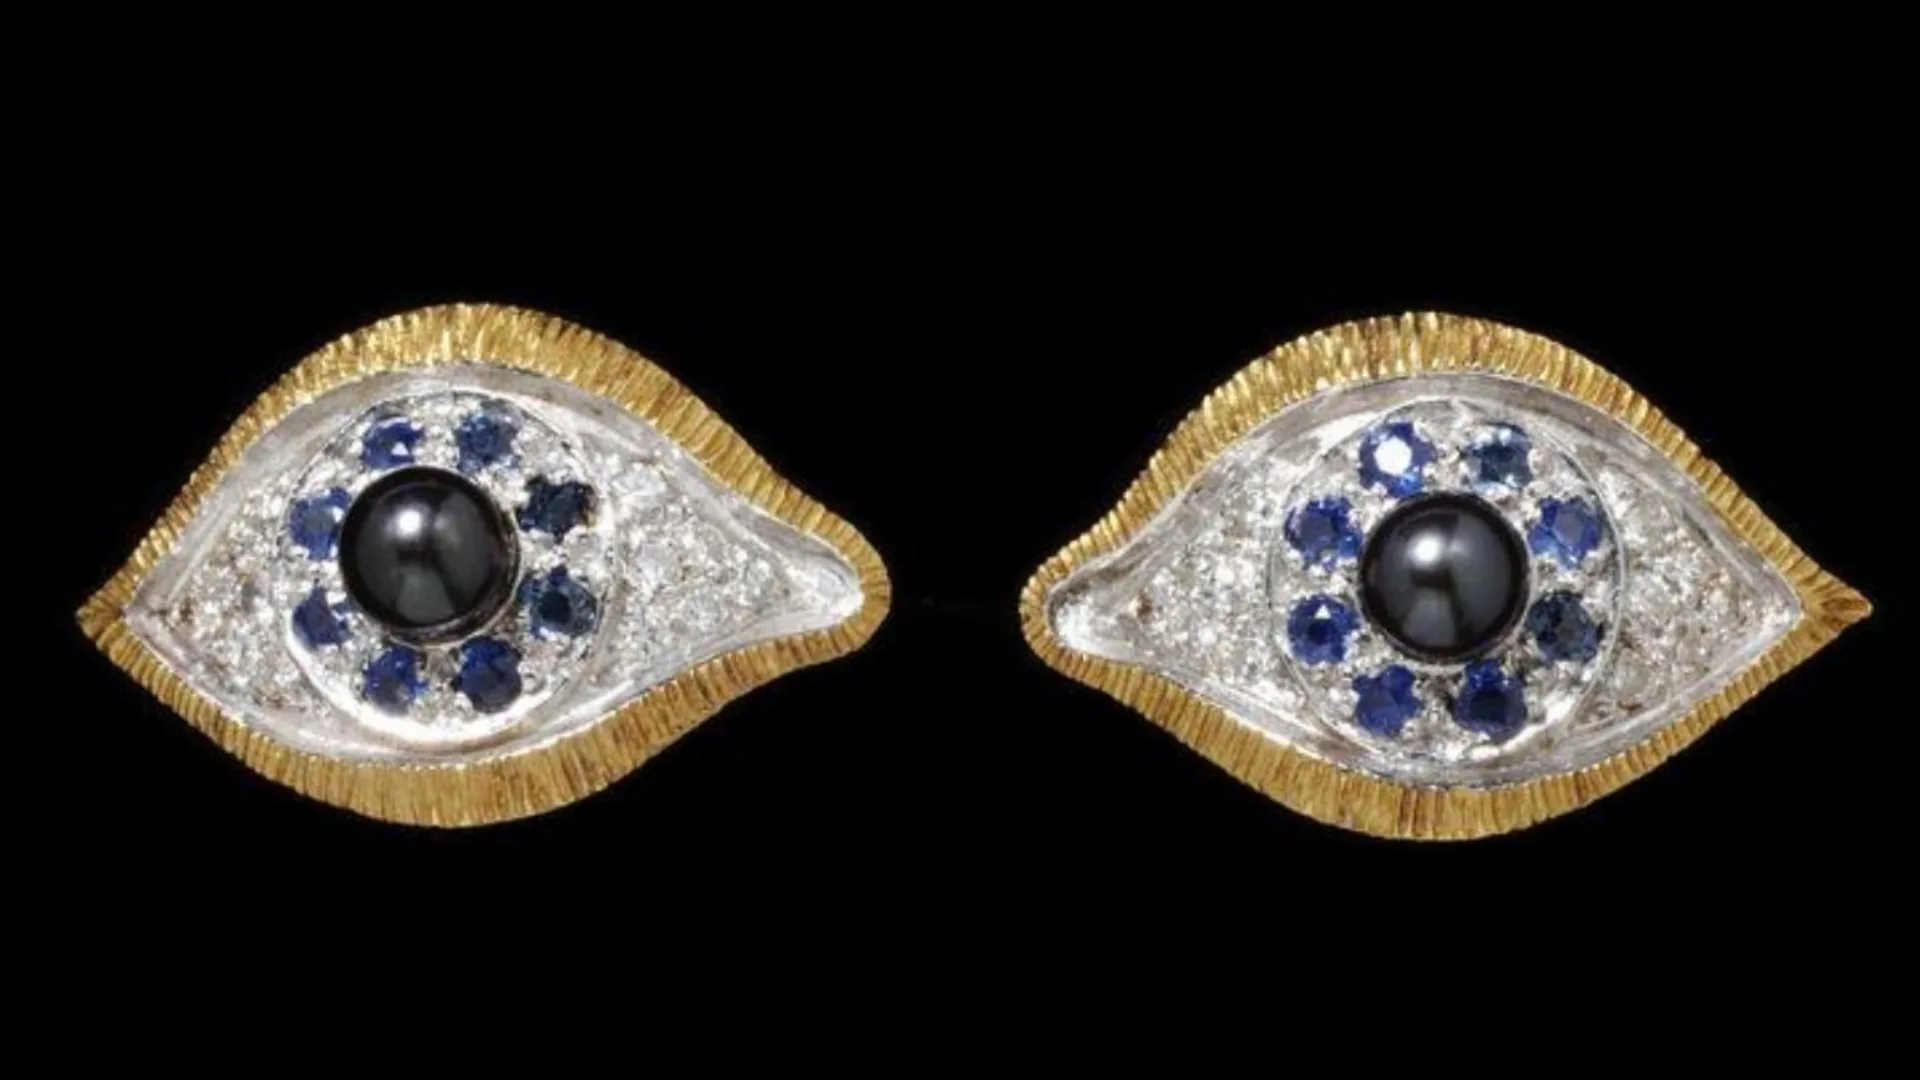 jewelled brooches in the shape of two eyes, with black pearls diamonds and sapphires